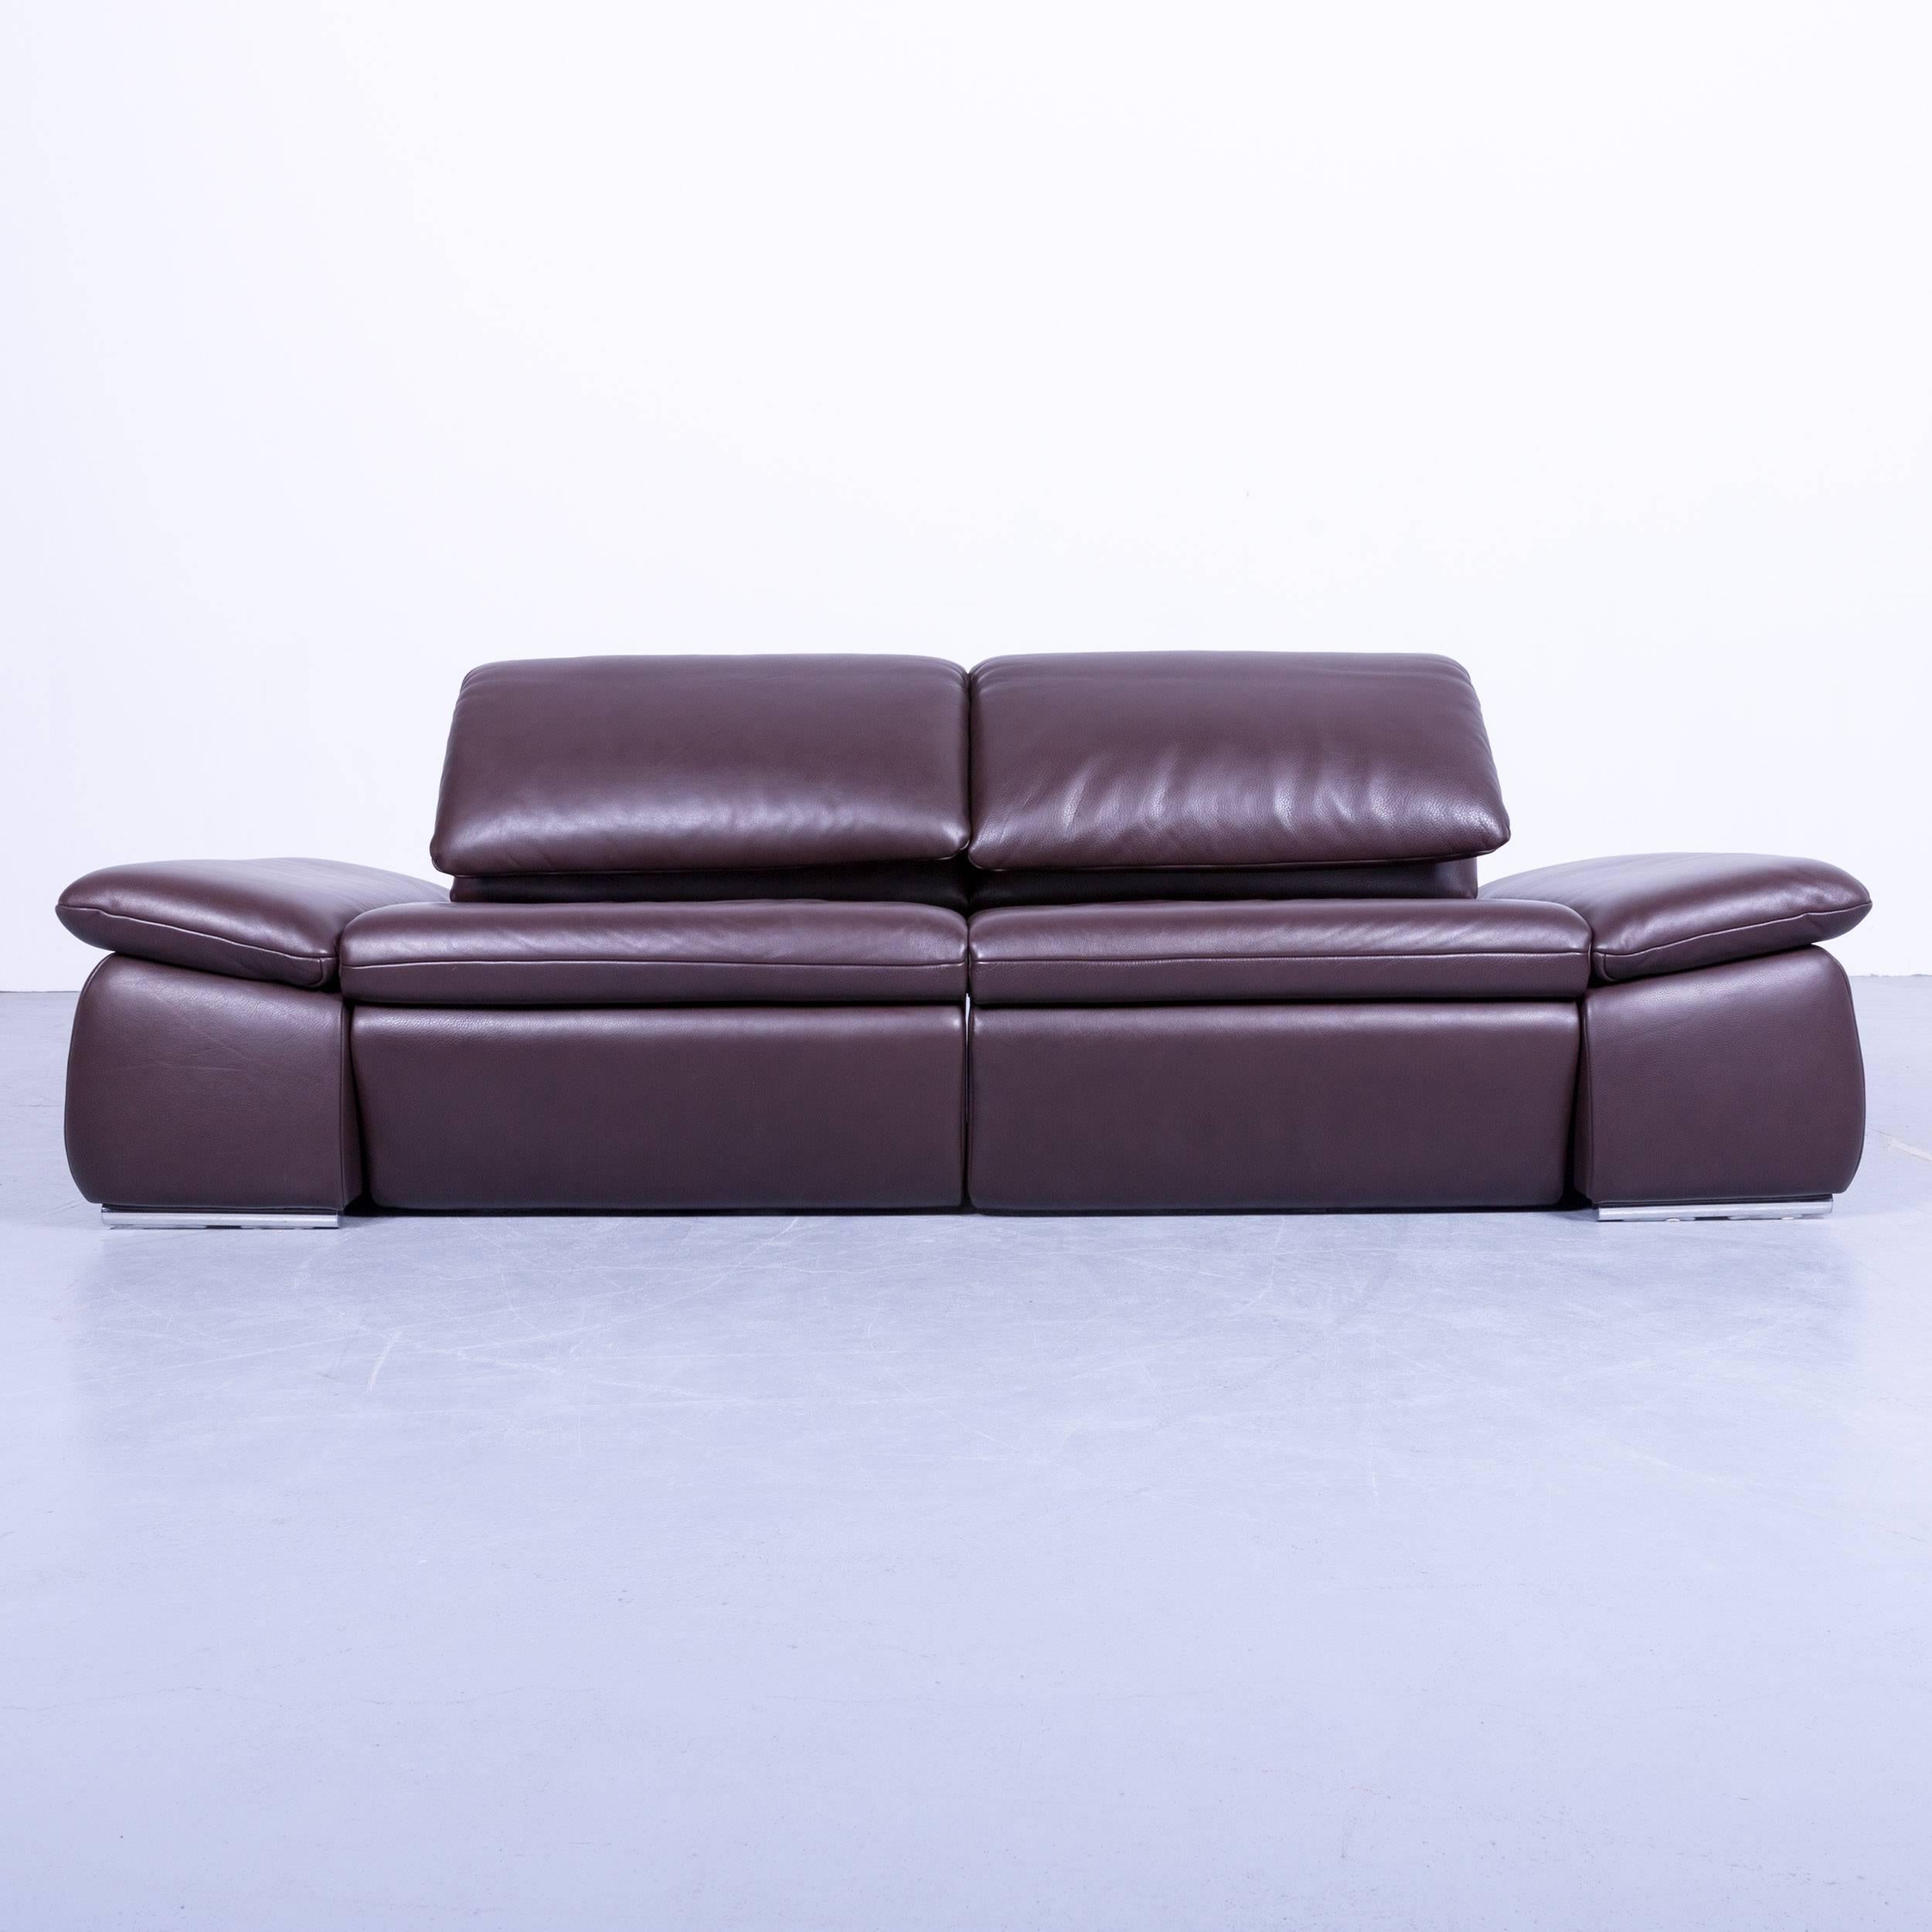 Koinor Evento Designer Sofa Brown Mocca Leather Electric Function Modern In Excellent Condition For Sale In Cologne, DE